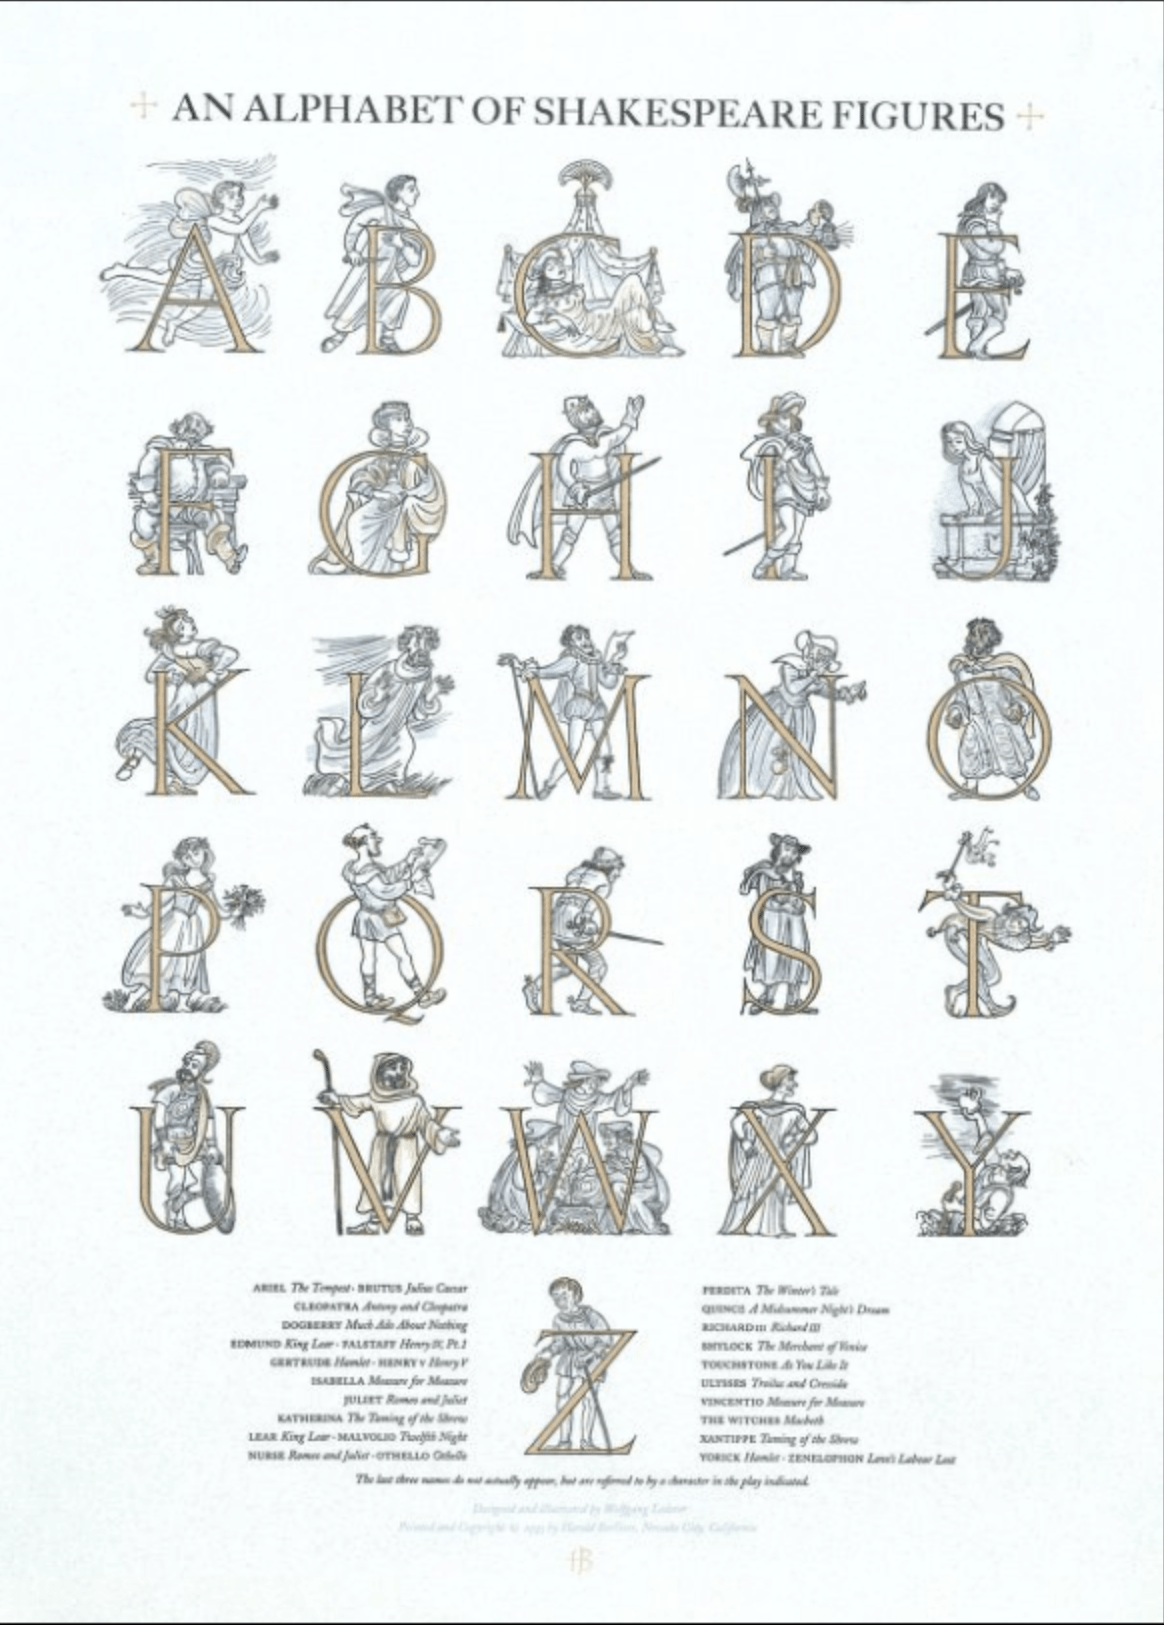 An Alphabet of Shakespeare Figures, printed in 1993, by Wolfgang Lederer. Shows the alphabet accompanied by illustrations of Shakespearean characters.